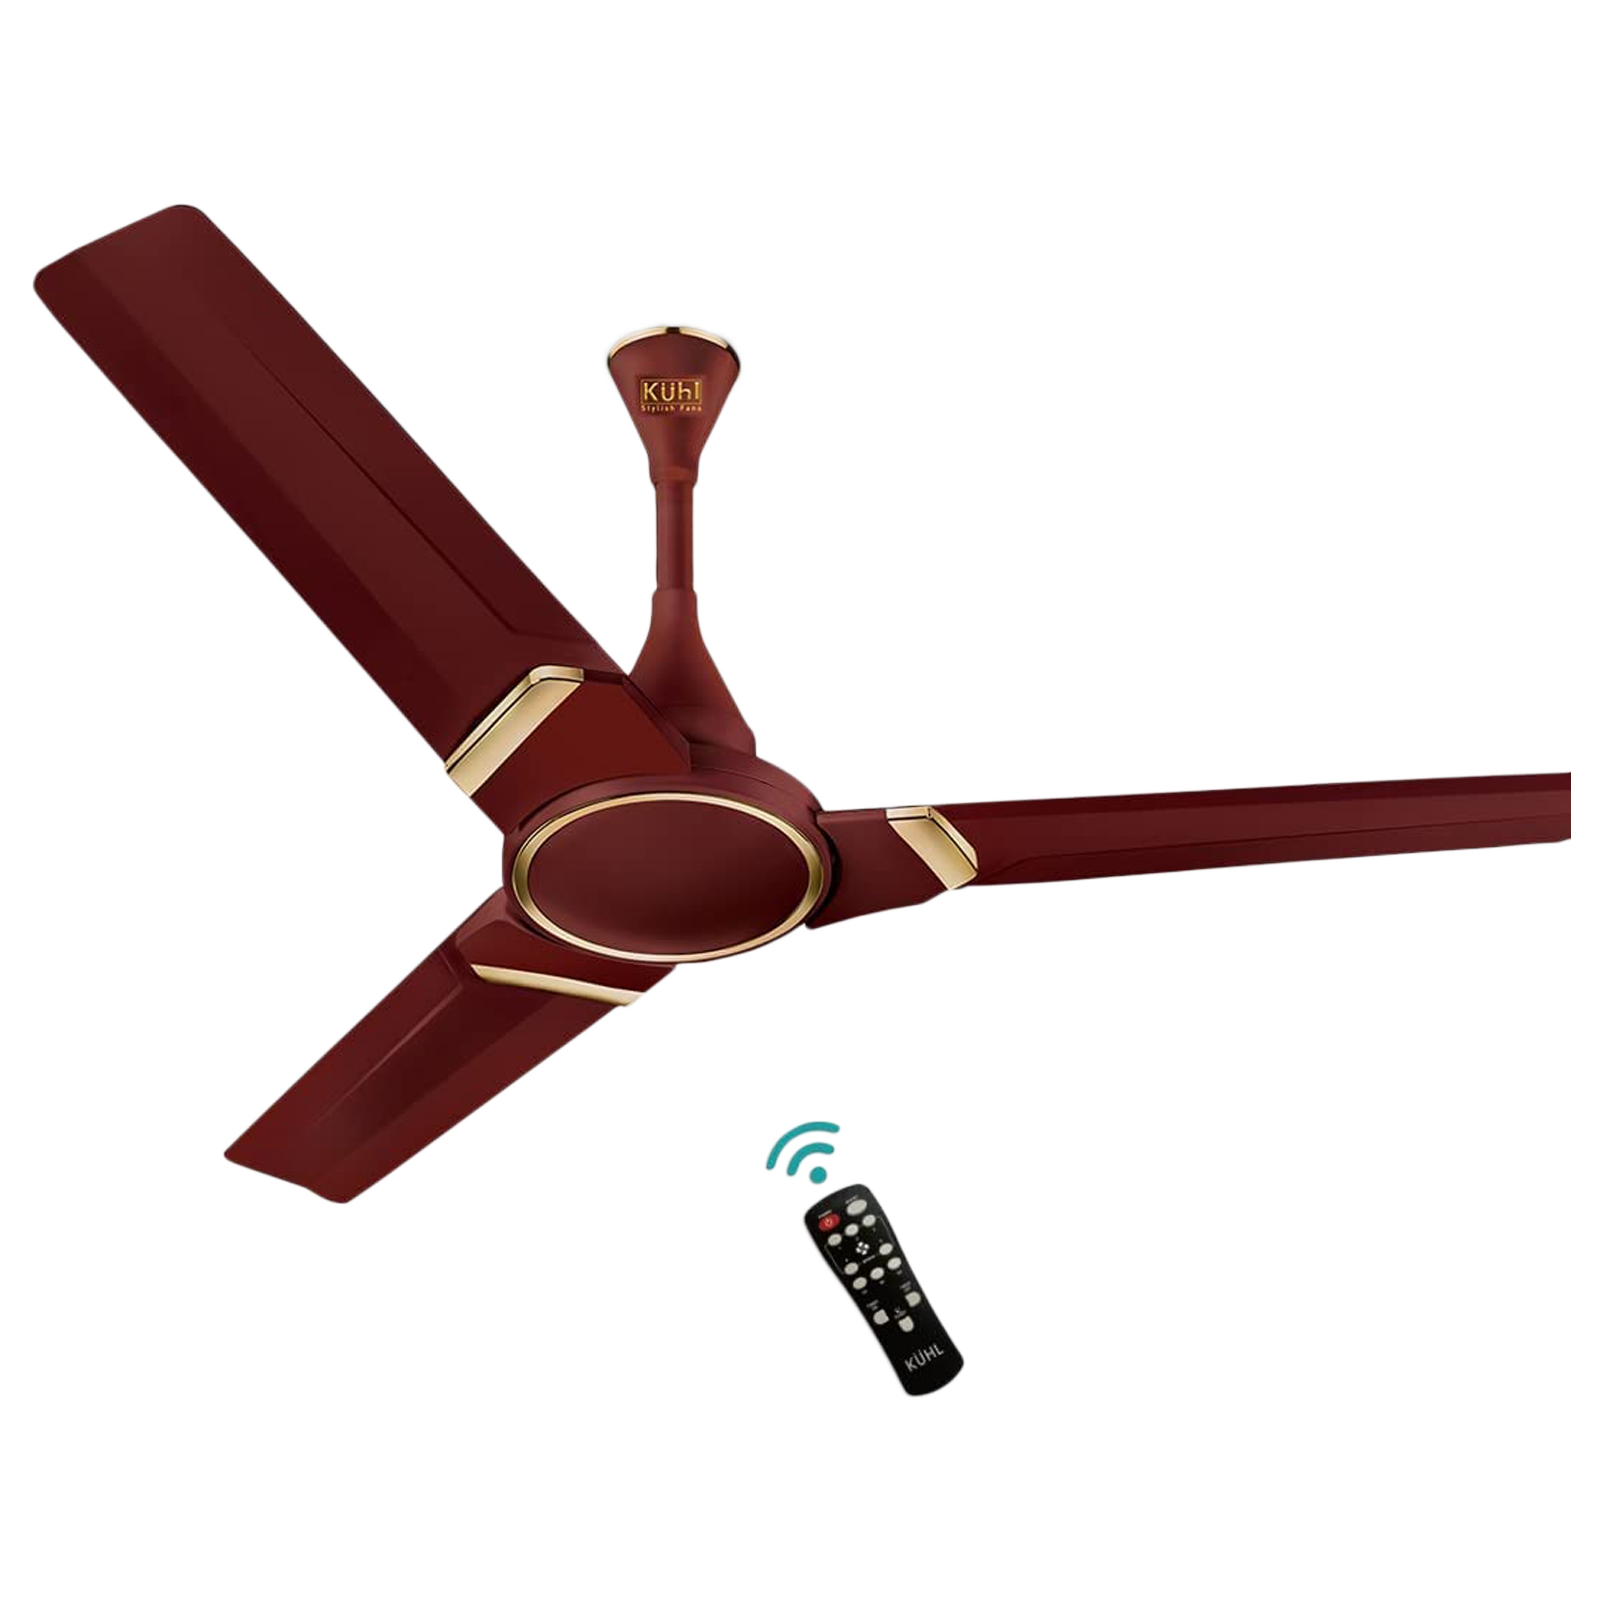 Kuhl Prima A3 120cm Sweep 3 Blade Ceiling Fan (With BLDC Motor, 19003B, Brown)